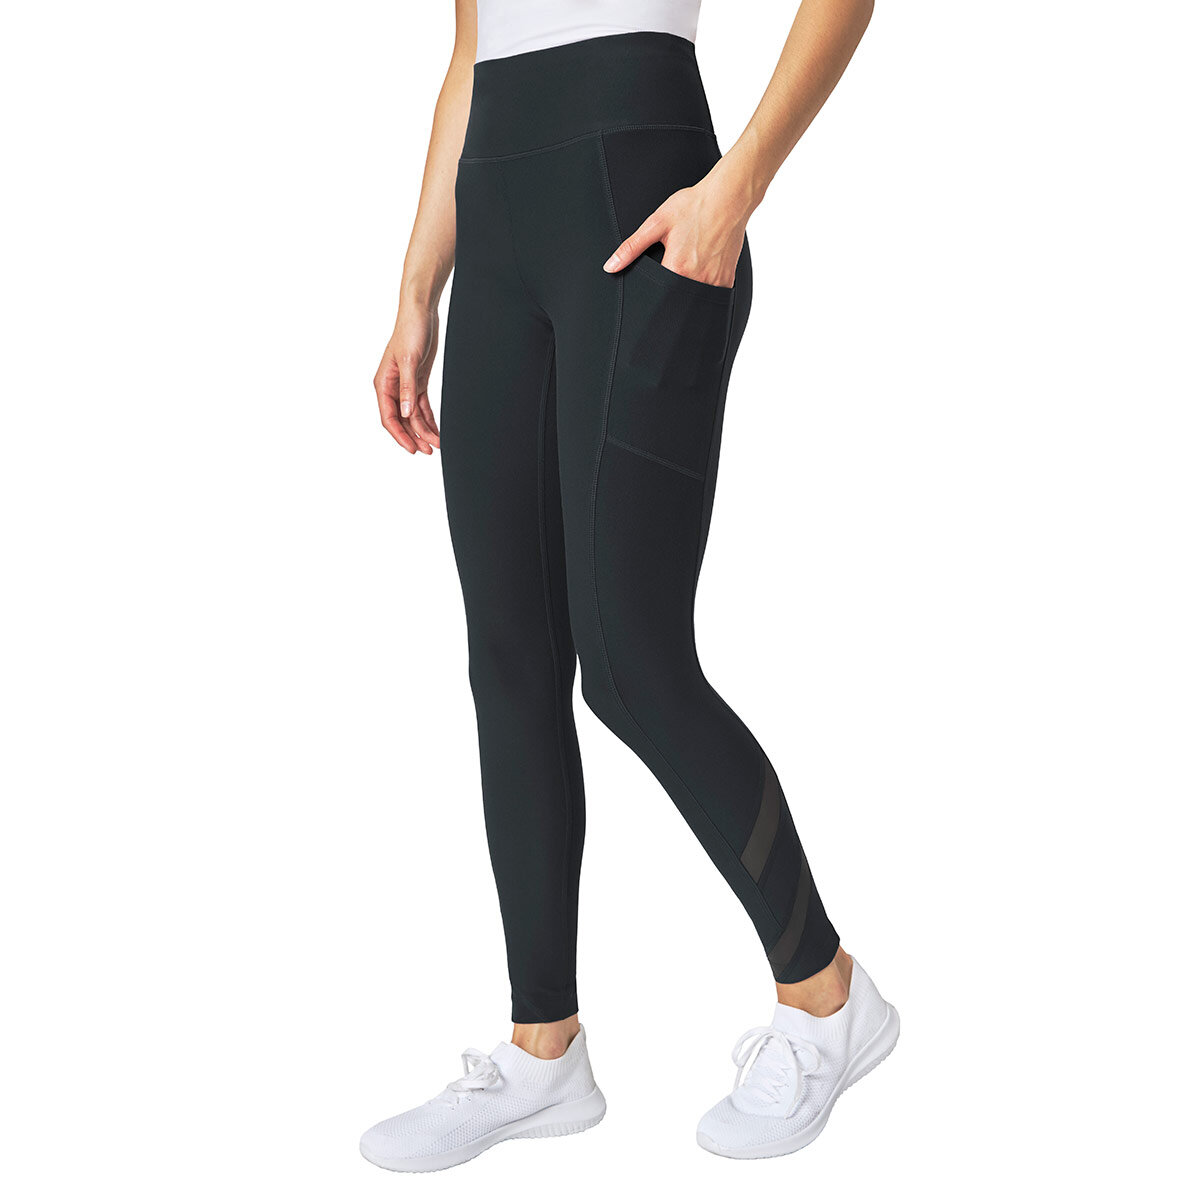 Mondetta Active High Waisted Active Tight with Mesh in Black - Medium